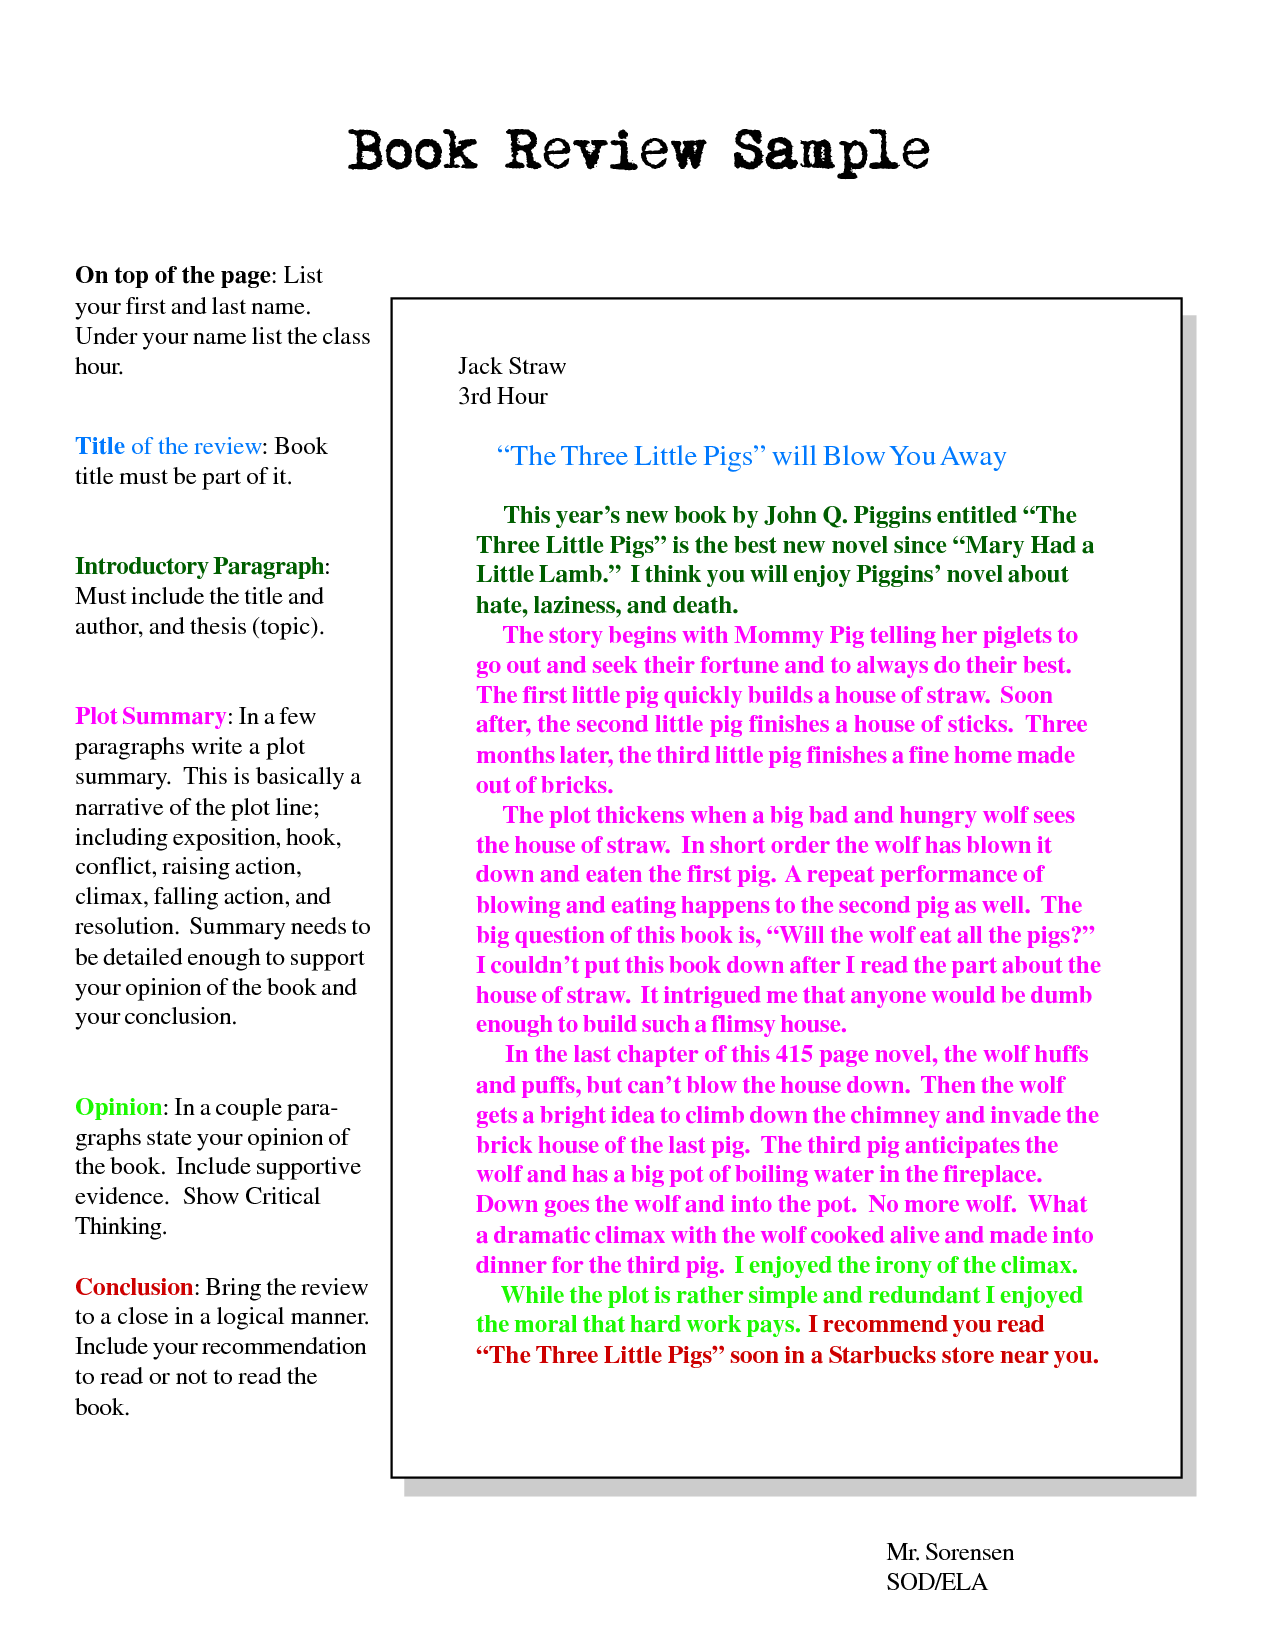 Book Review Writing Examples